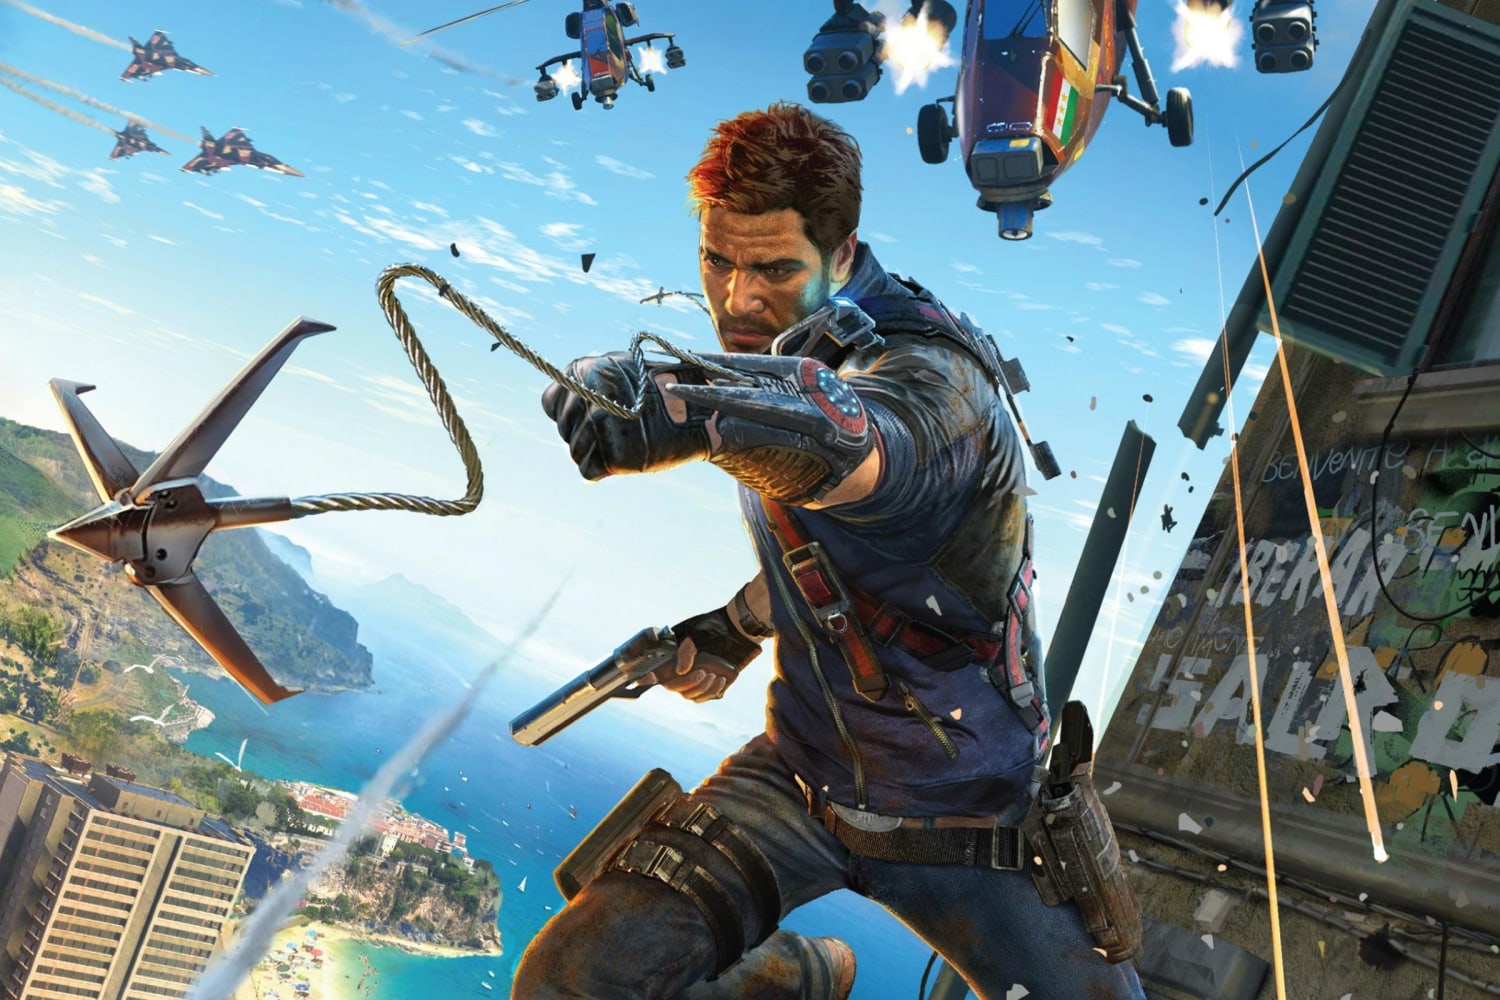 features Just Cause 3 needs